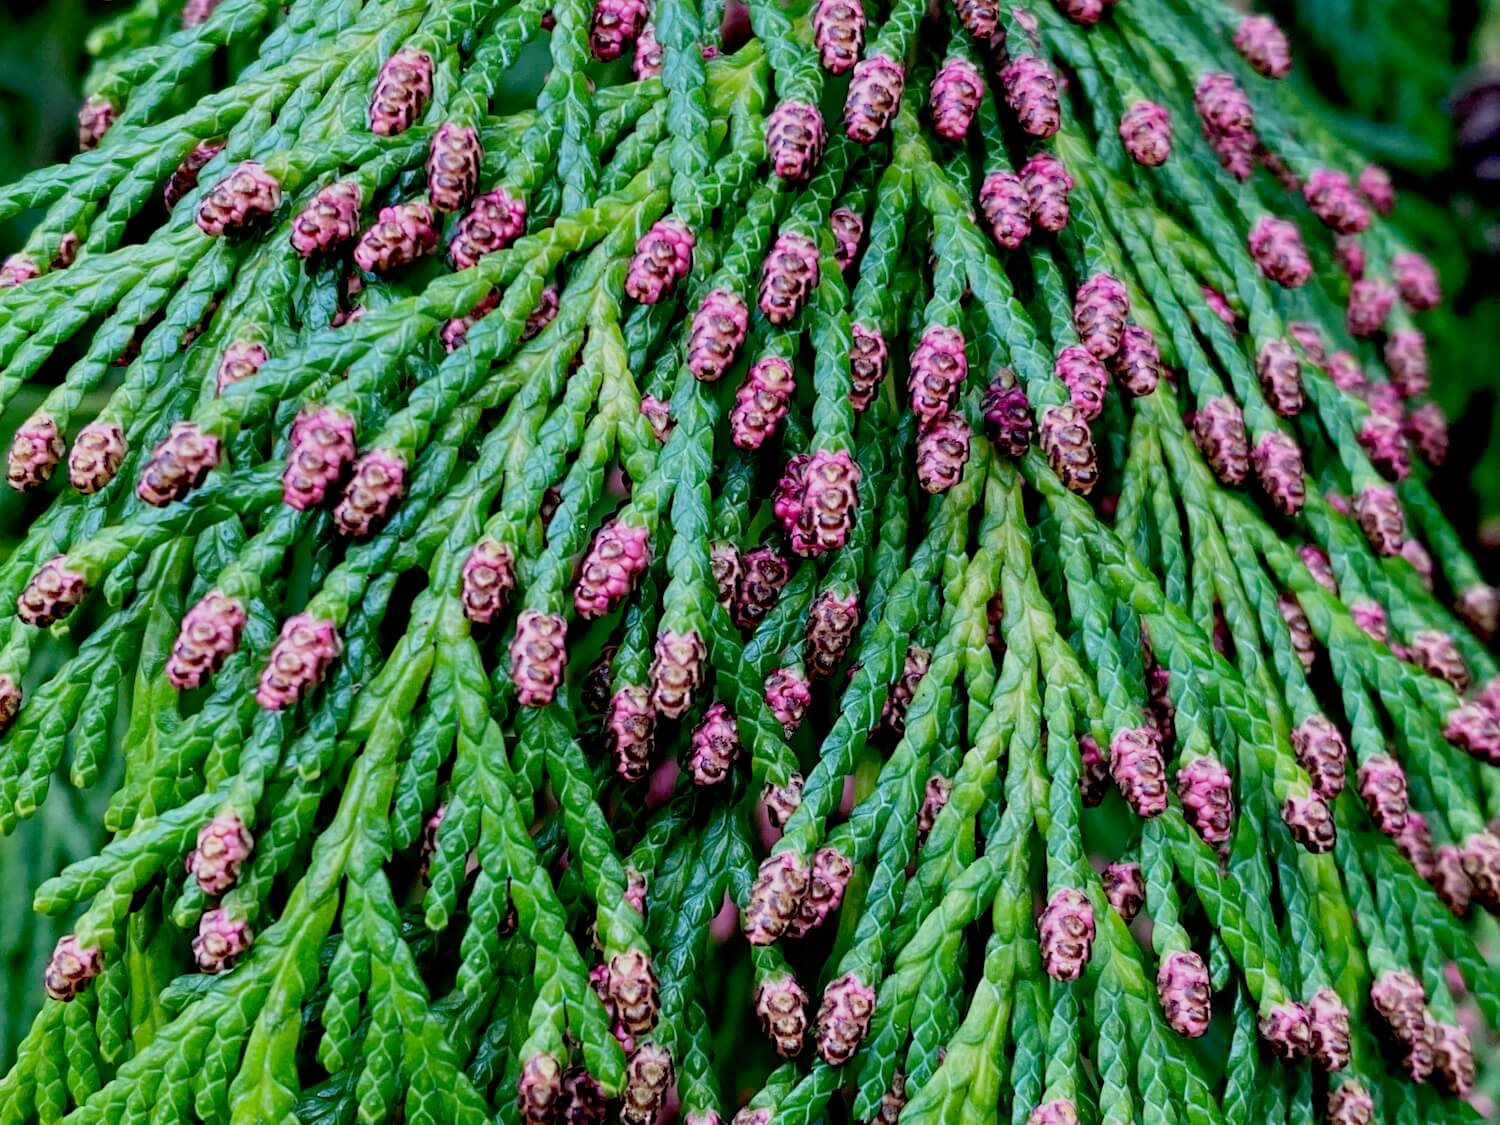 Close up of a branch of the majestic cedar tree. The leaves are bright waxy green while the array of tiny pinecones are a reddish brown color.